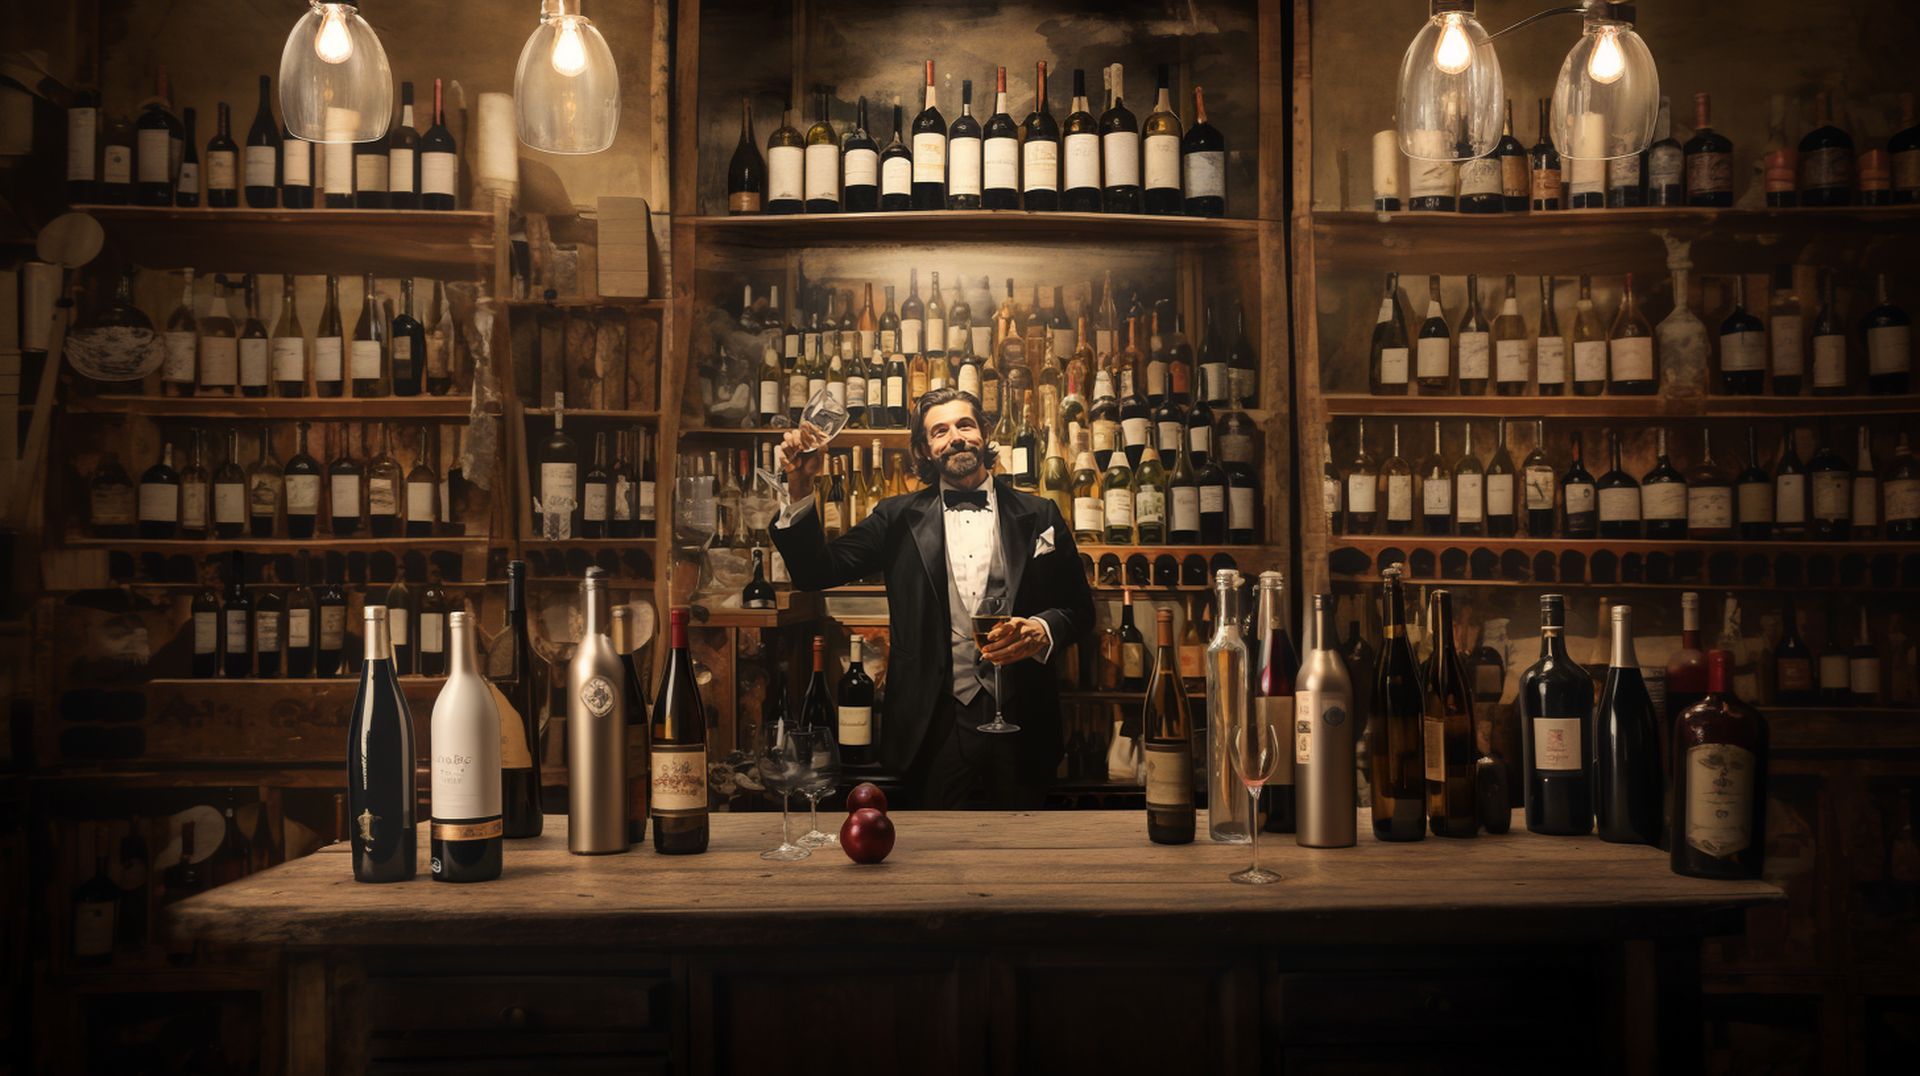 In Vino Veritas - A Toast to the Art of Wine Brands Selection by umut taydaş